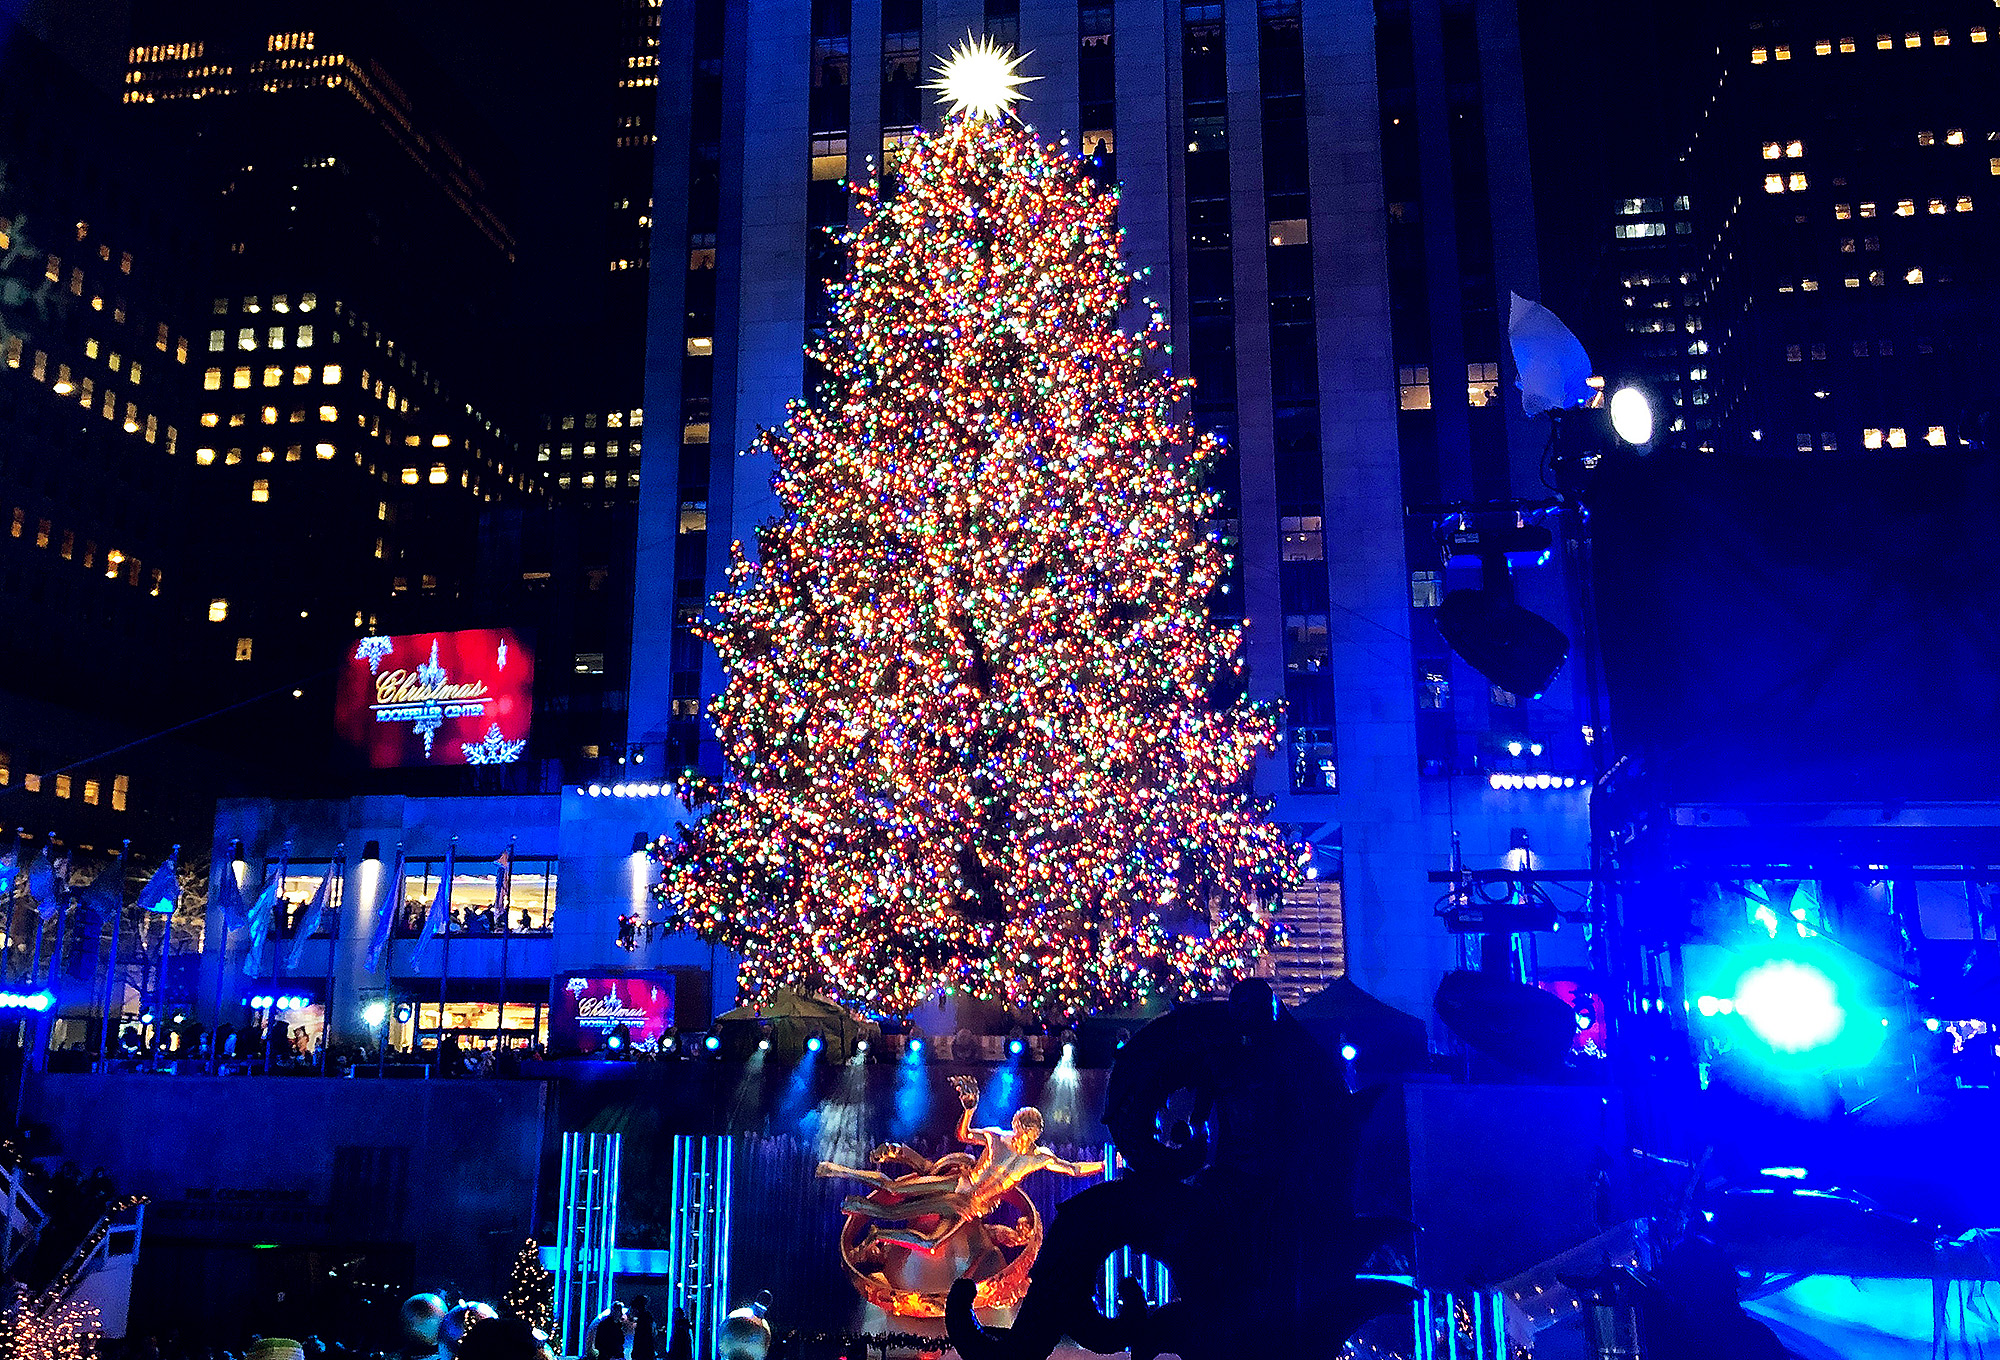 In pictures Rockefeller Center Christmas Tree is ready for the holiday